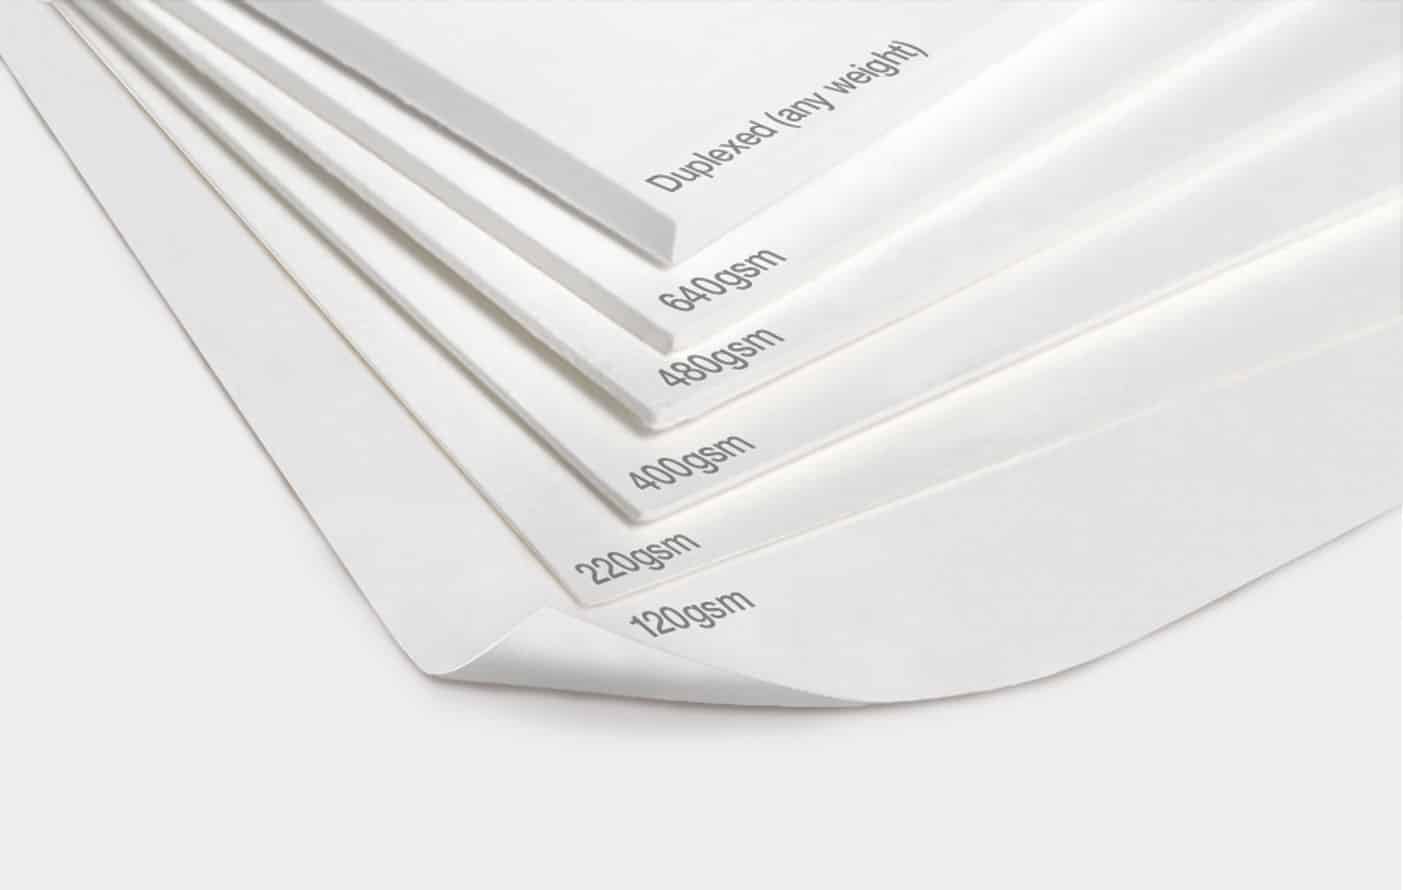 Paper weight ranging from 300-380 gsm, Cover Paper